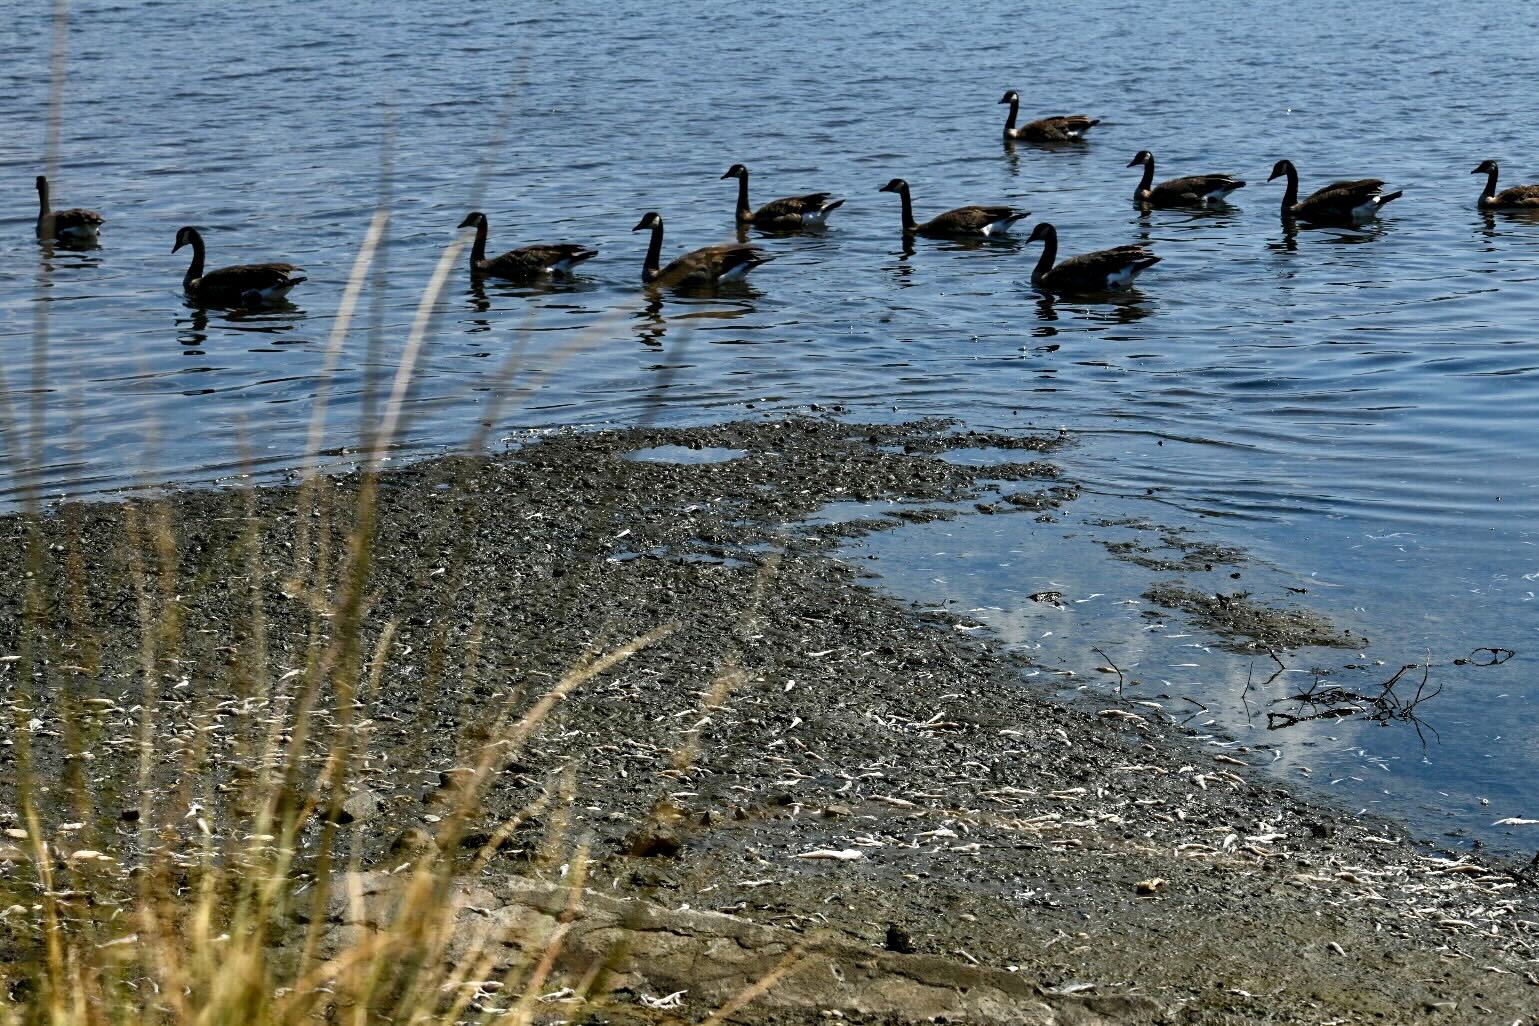 a flock of geese pass by dead fish on a lake shoreline